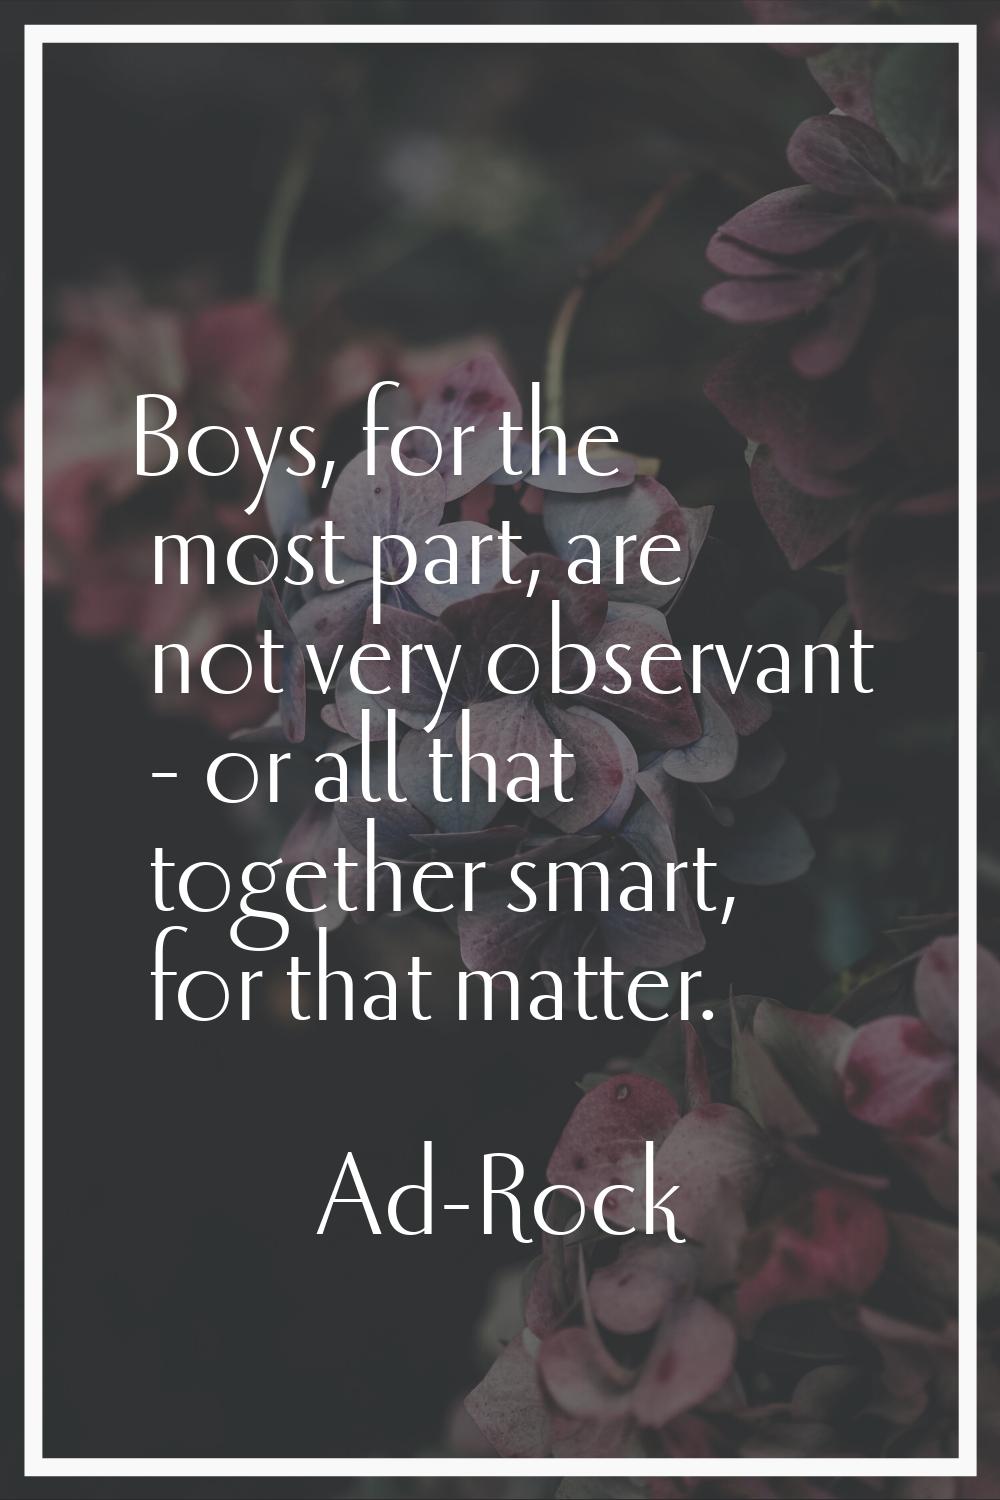 Boys, for the most part, are not very observant - or all that together smart, for that matter.